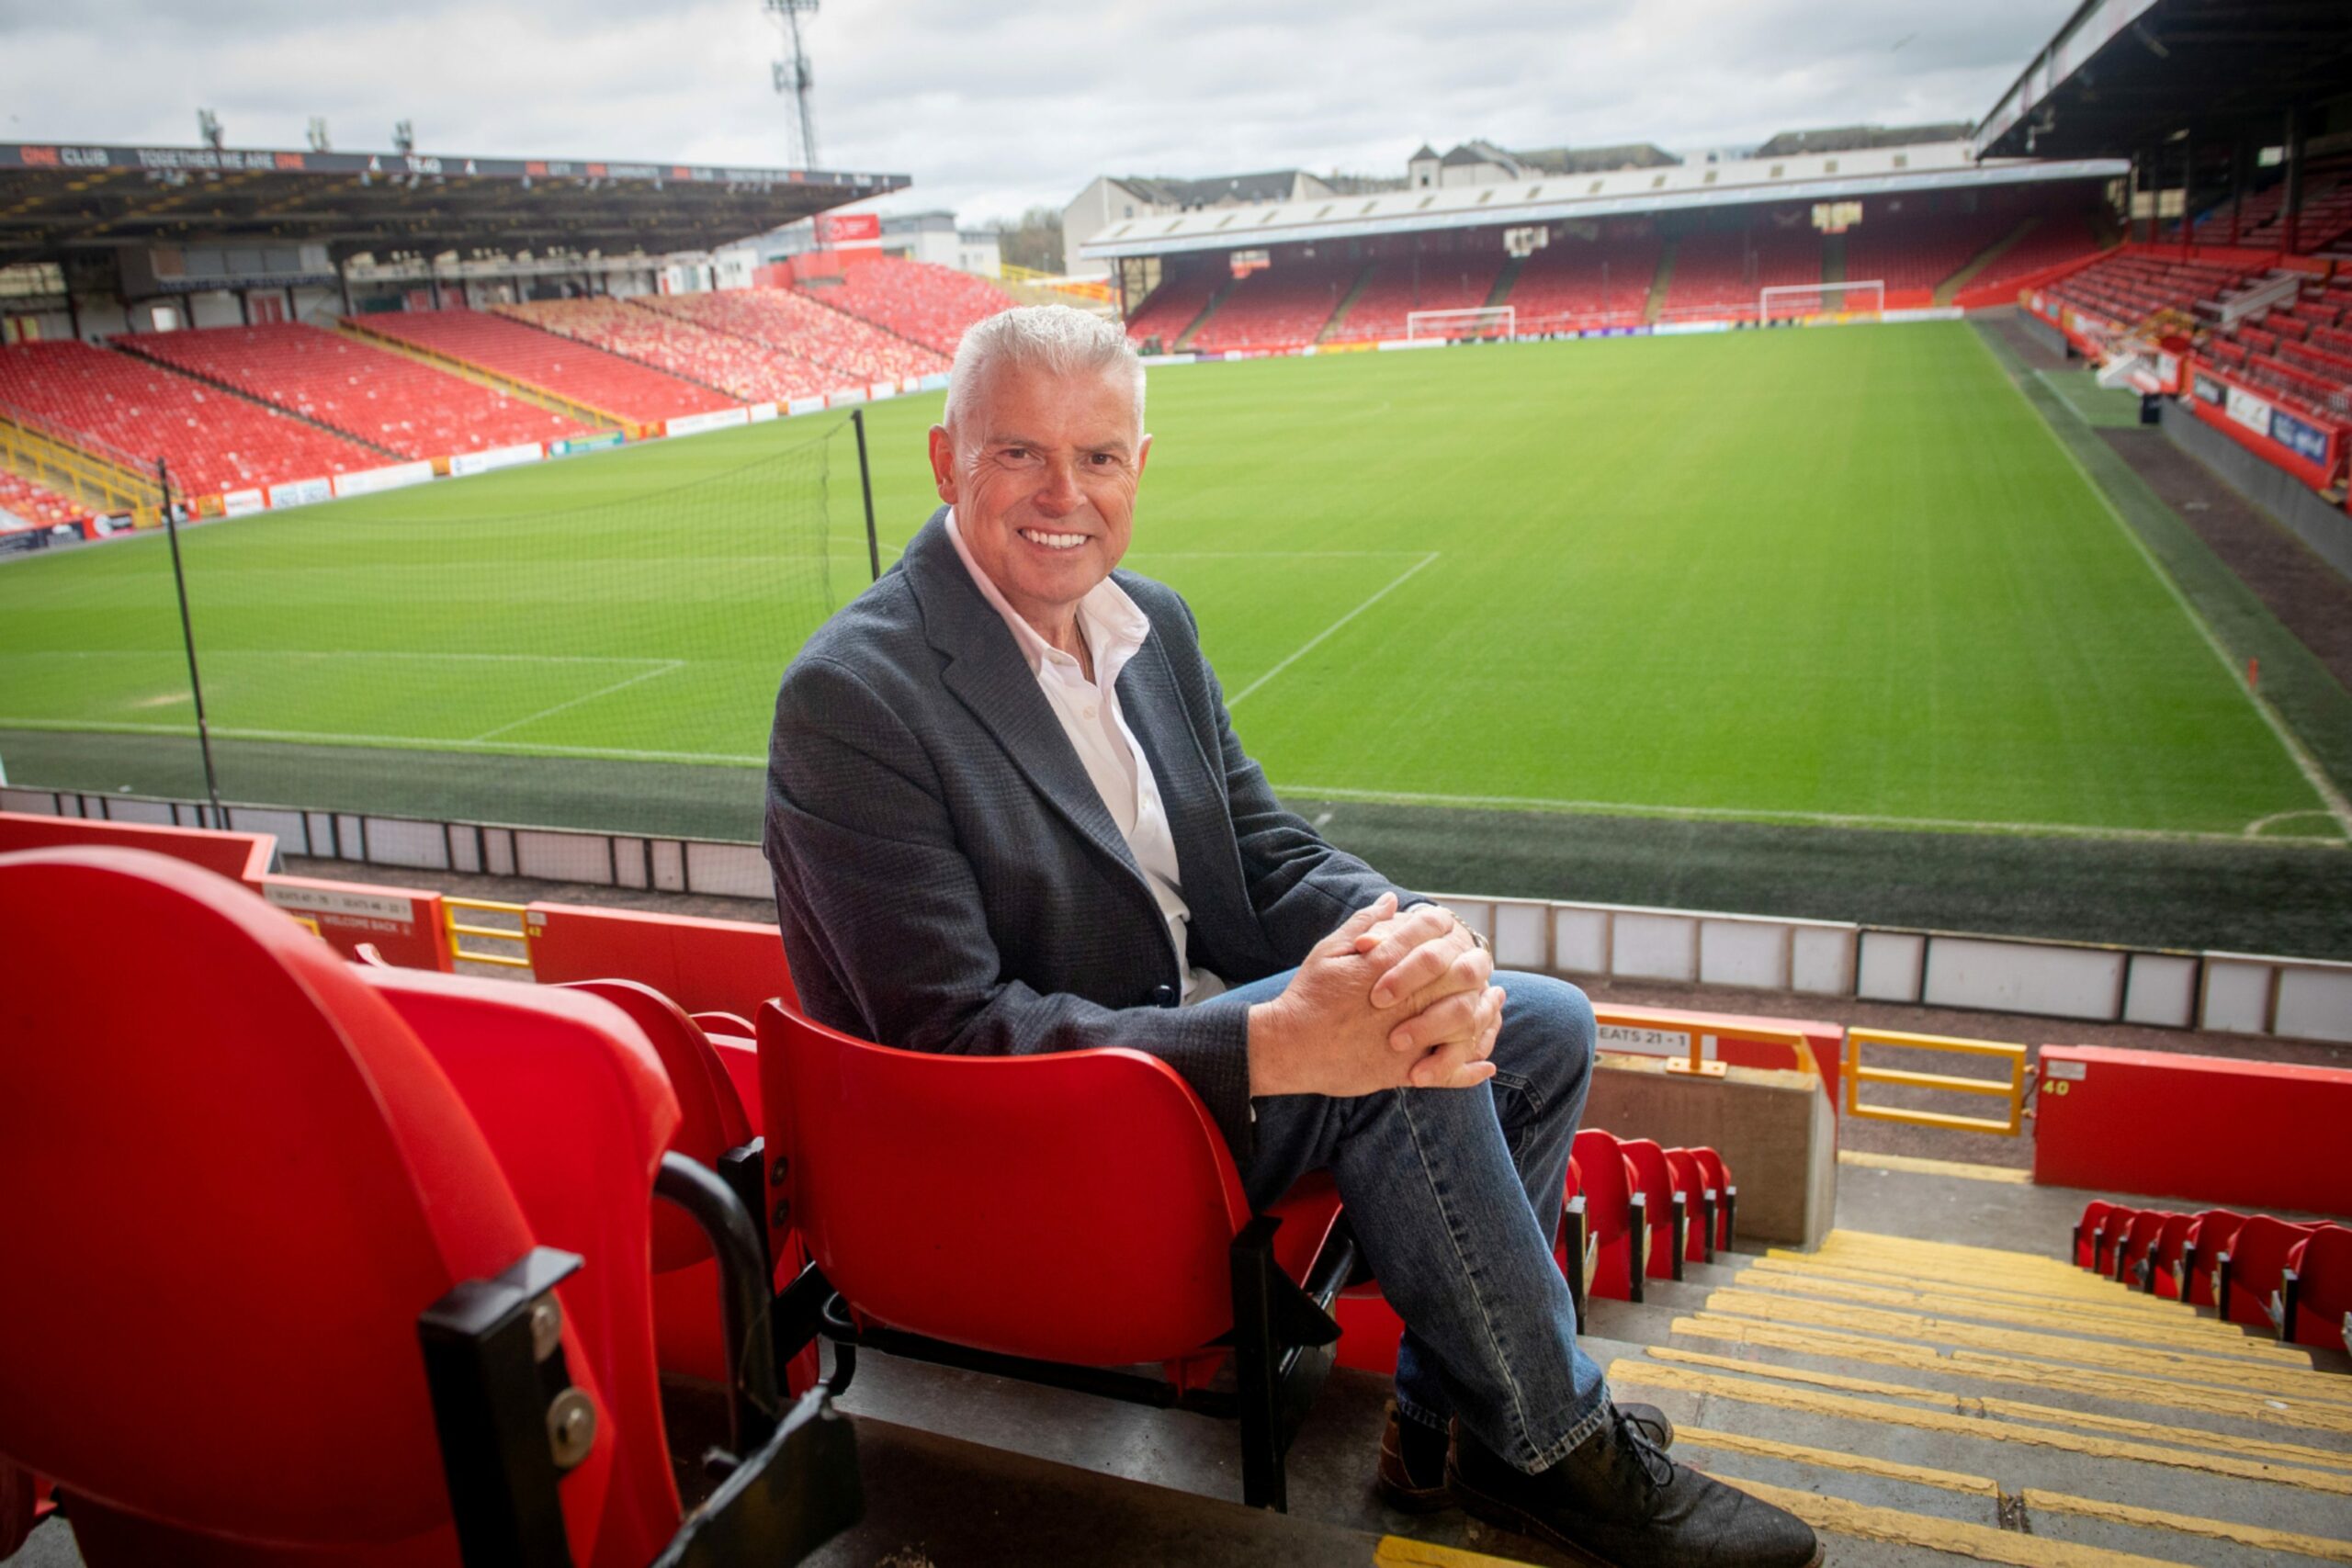 The AFC chairman sat in the stands at Pittodrie